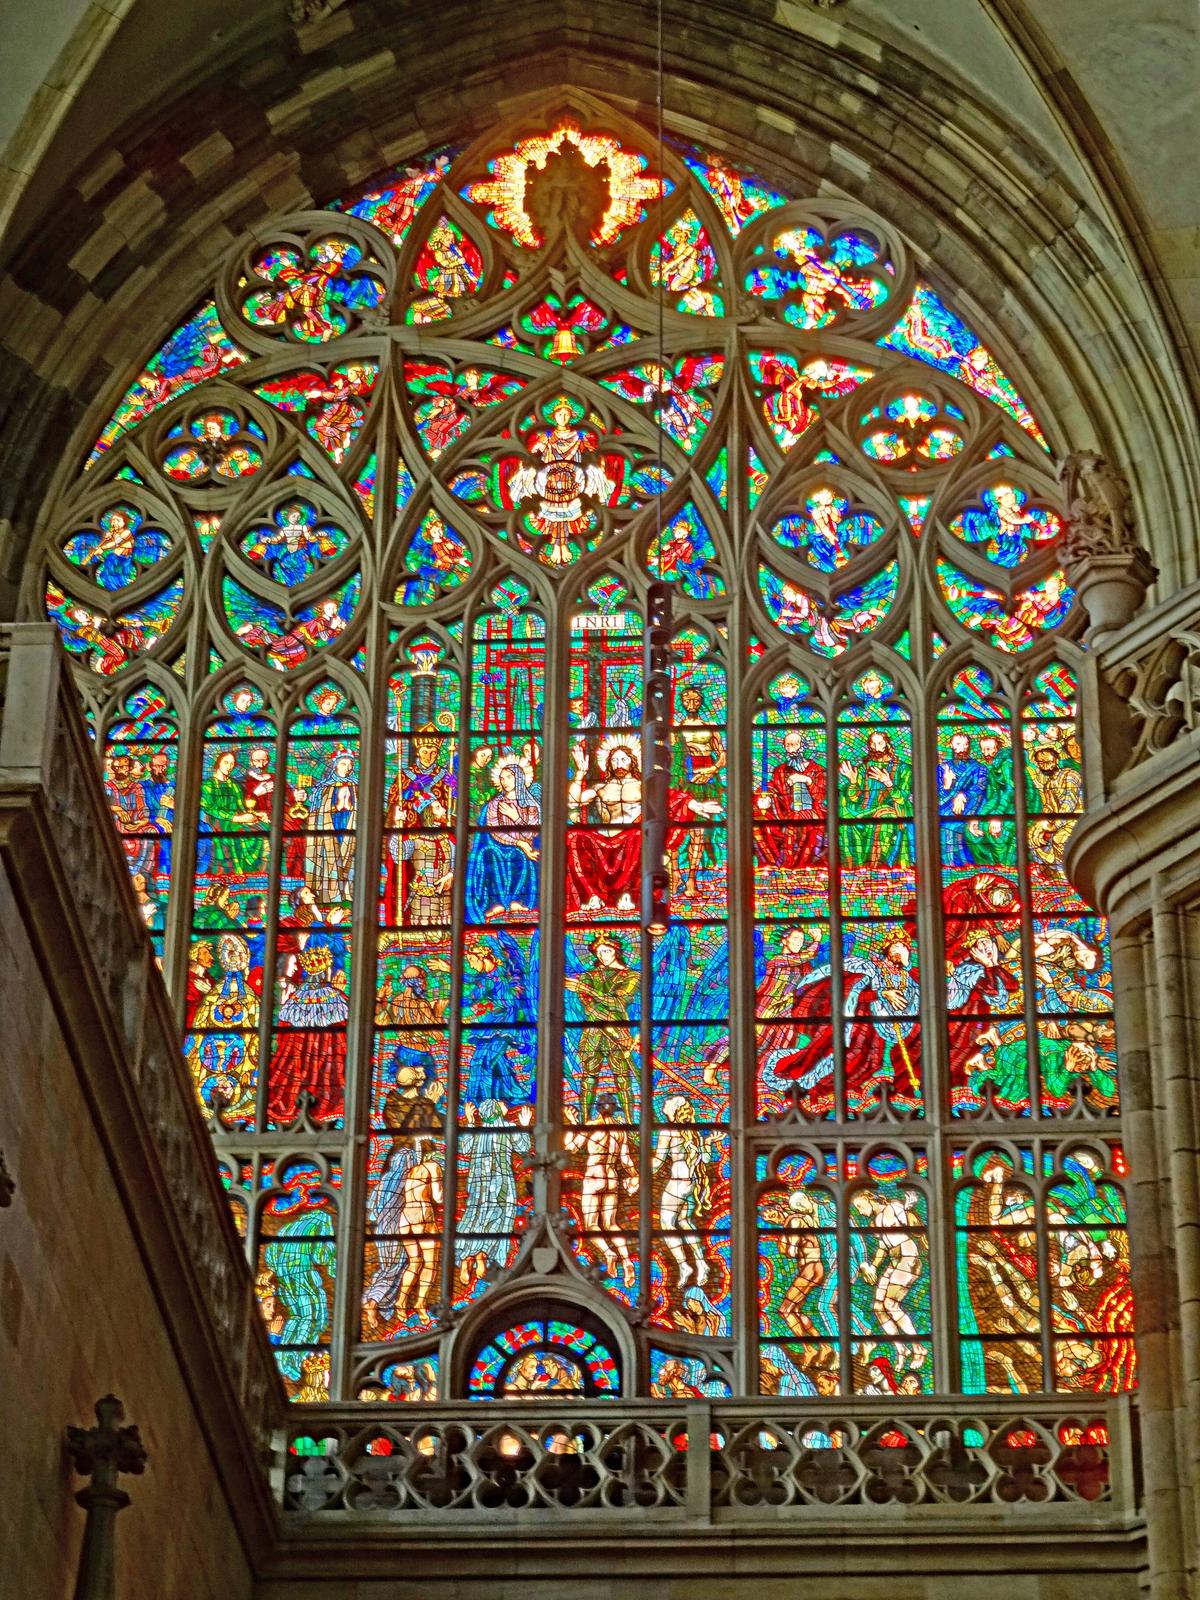 Tracery are stone structures that hold the sections of stained glass windows. Their vine-like sculptural forms create a weightless effect, lightening the atmosphere of the window composition. The scene here is a depiction by famous Prague artist Max Svabinsky of the Last Judgment. (ErwinMeier/CC BY-SA 4.0)